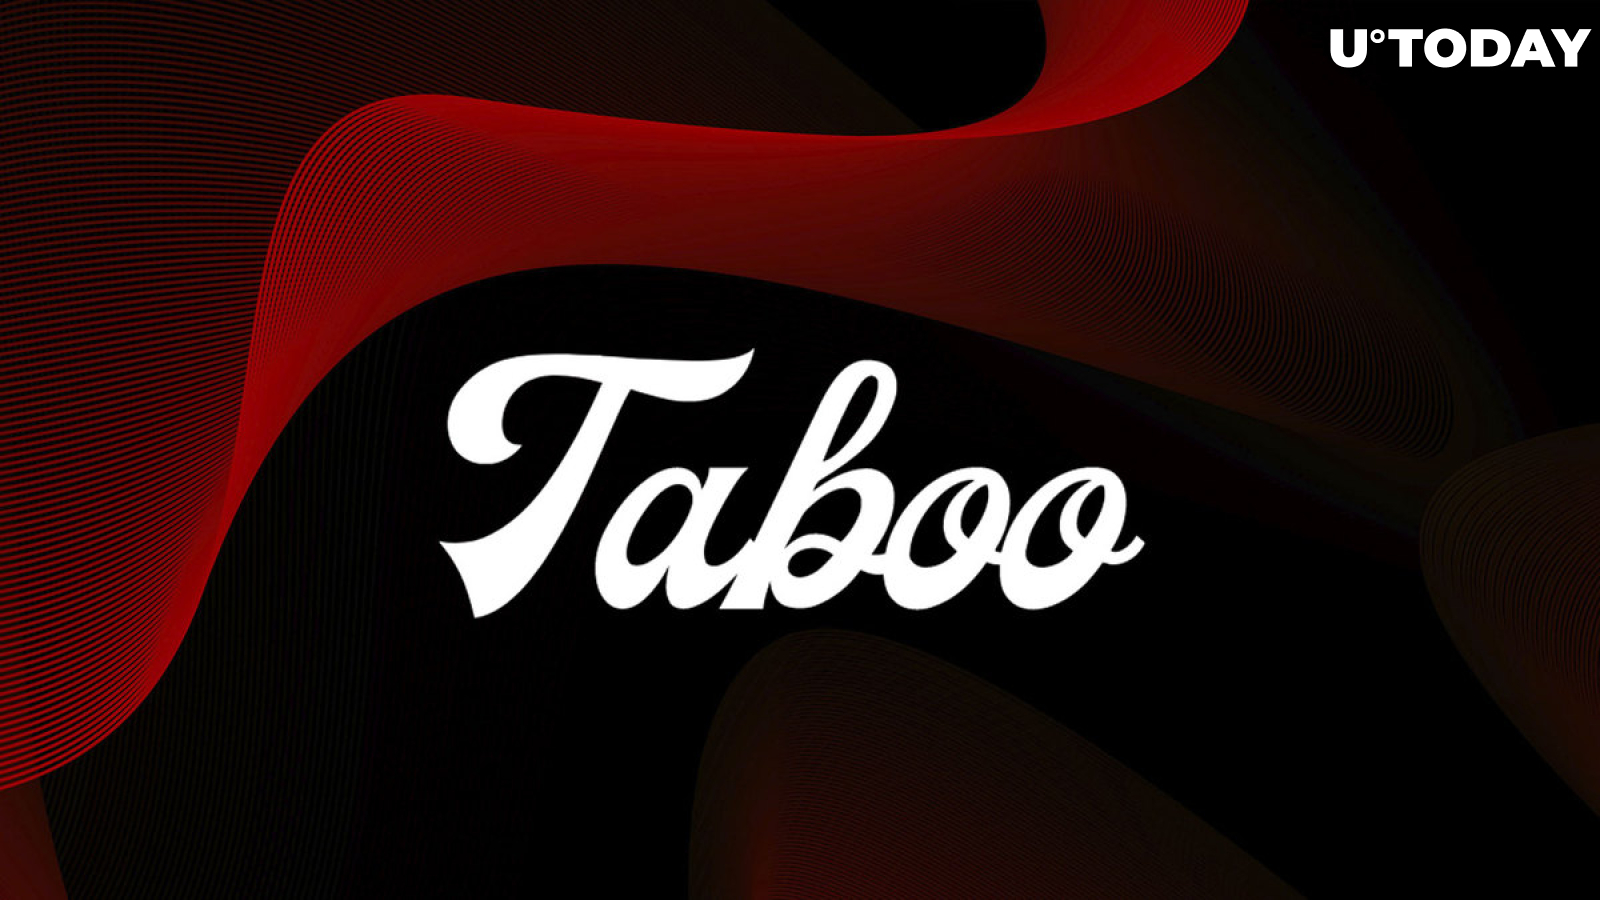 TABOO Secures $10 Million in Private Funding, Reaches $250 Million Valuation